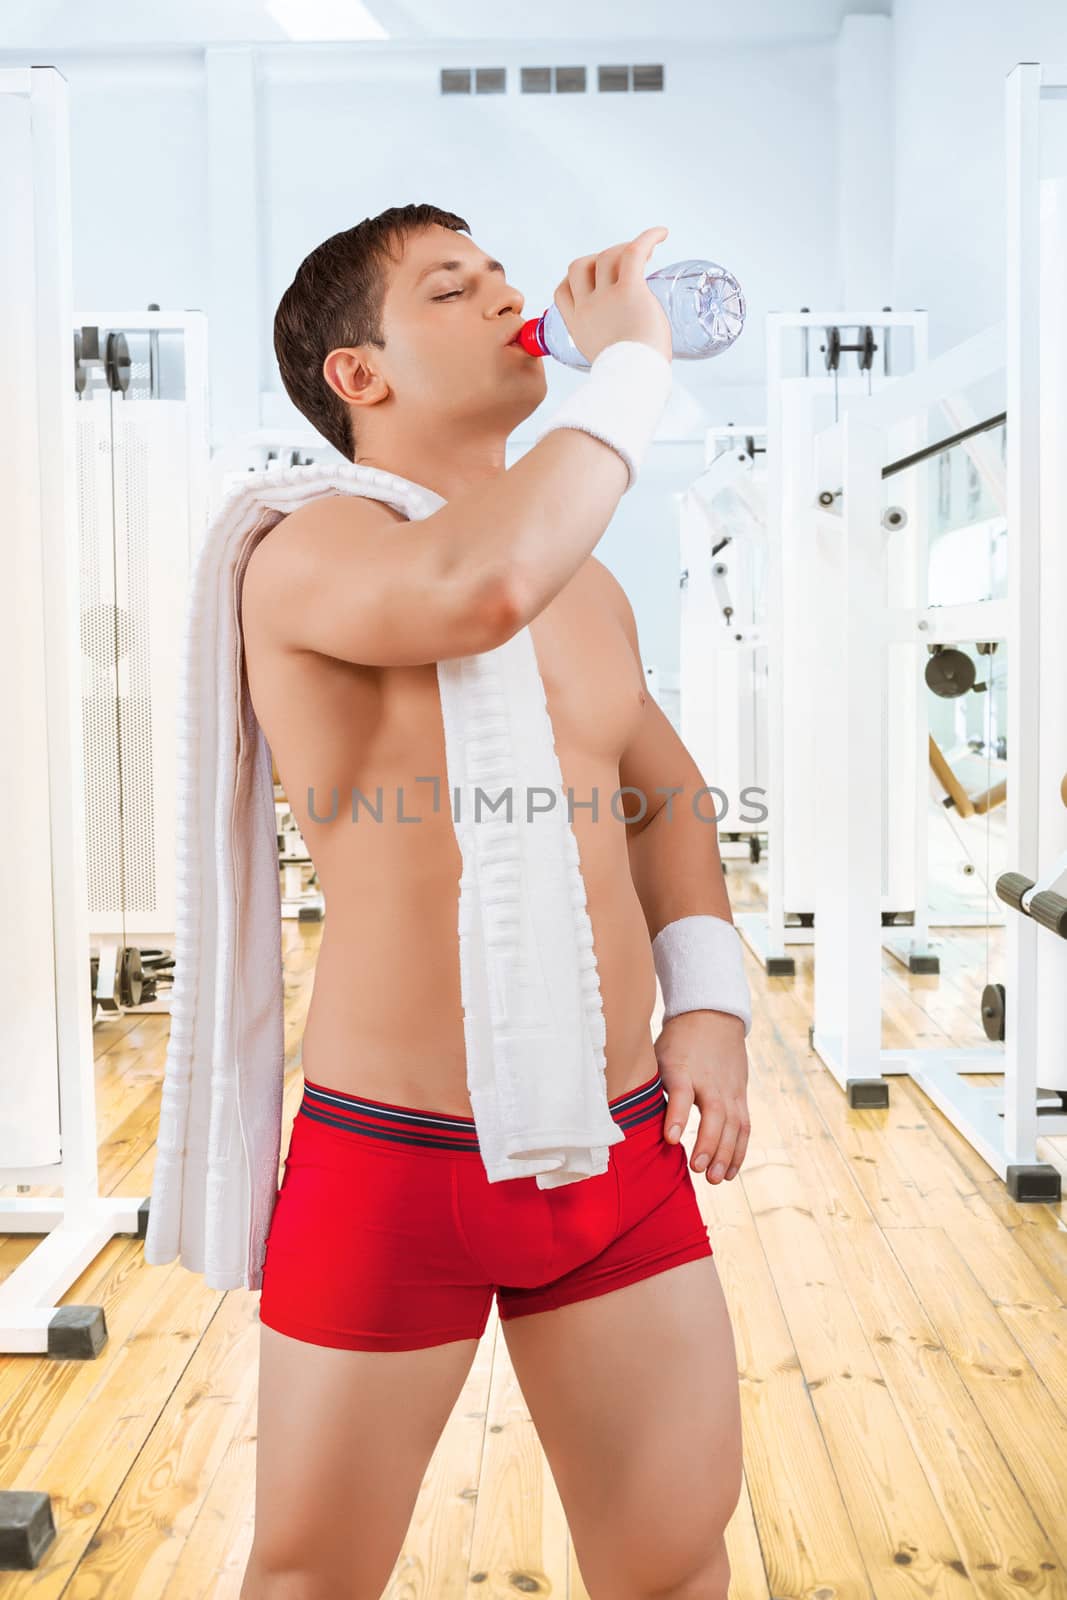 a sportsman drinking water in the gym